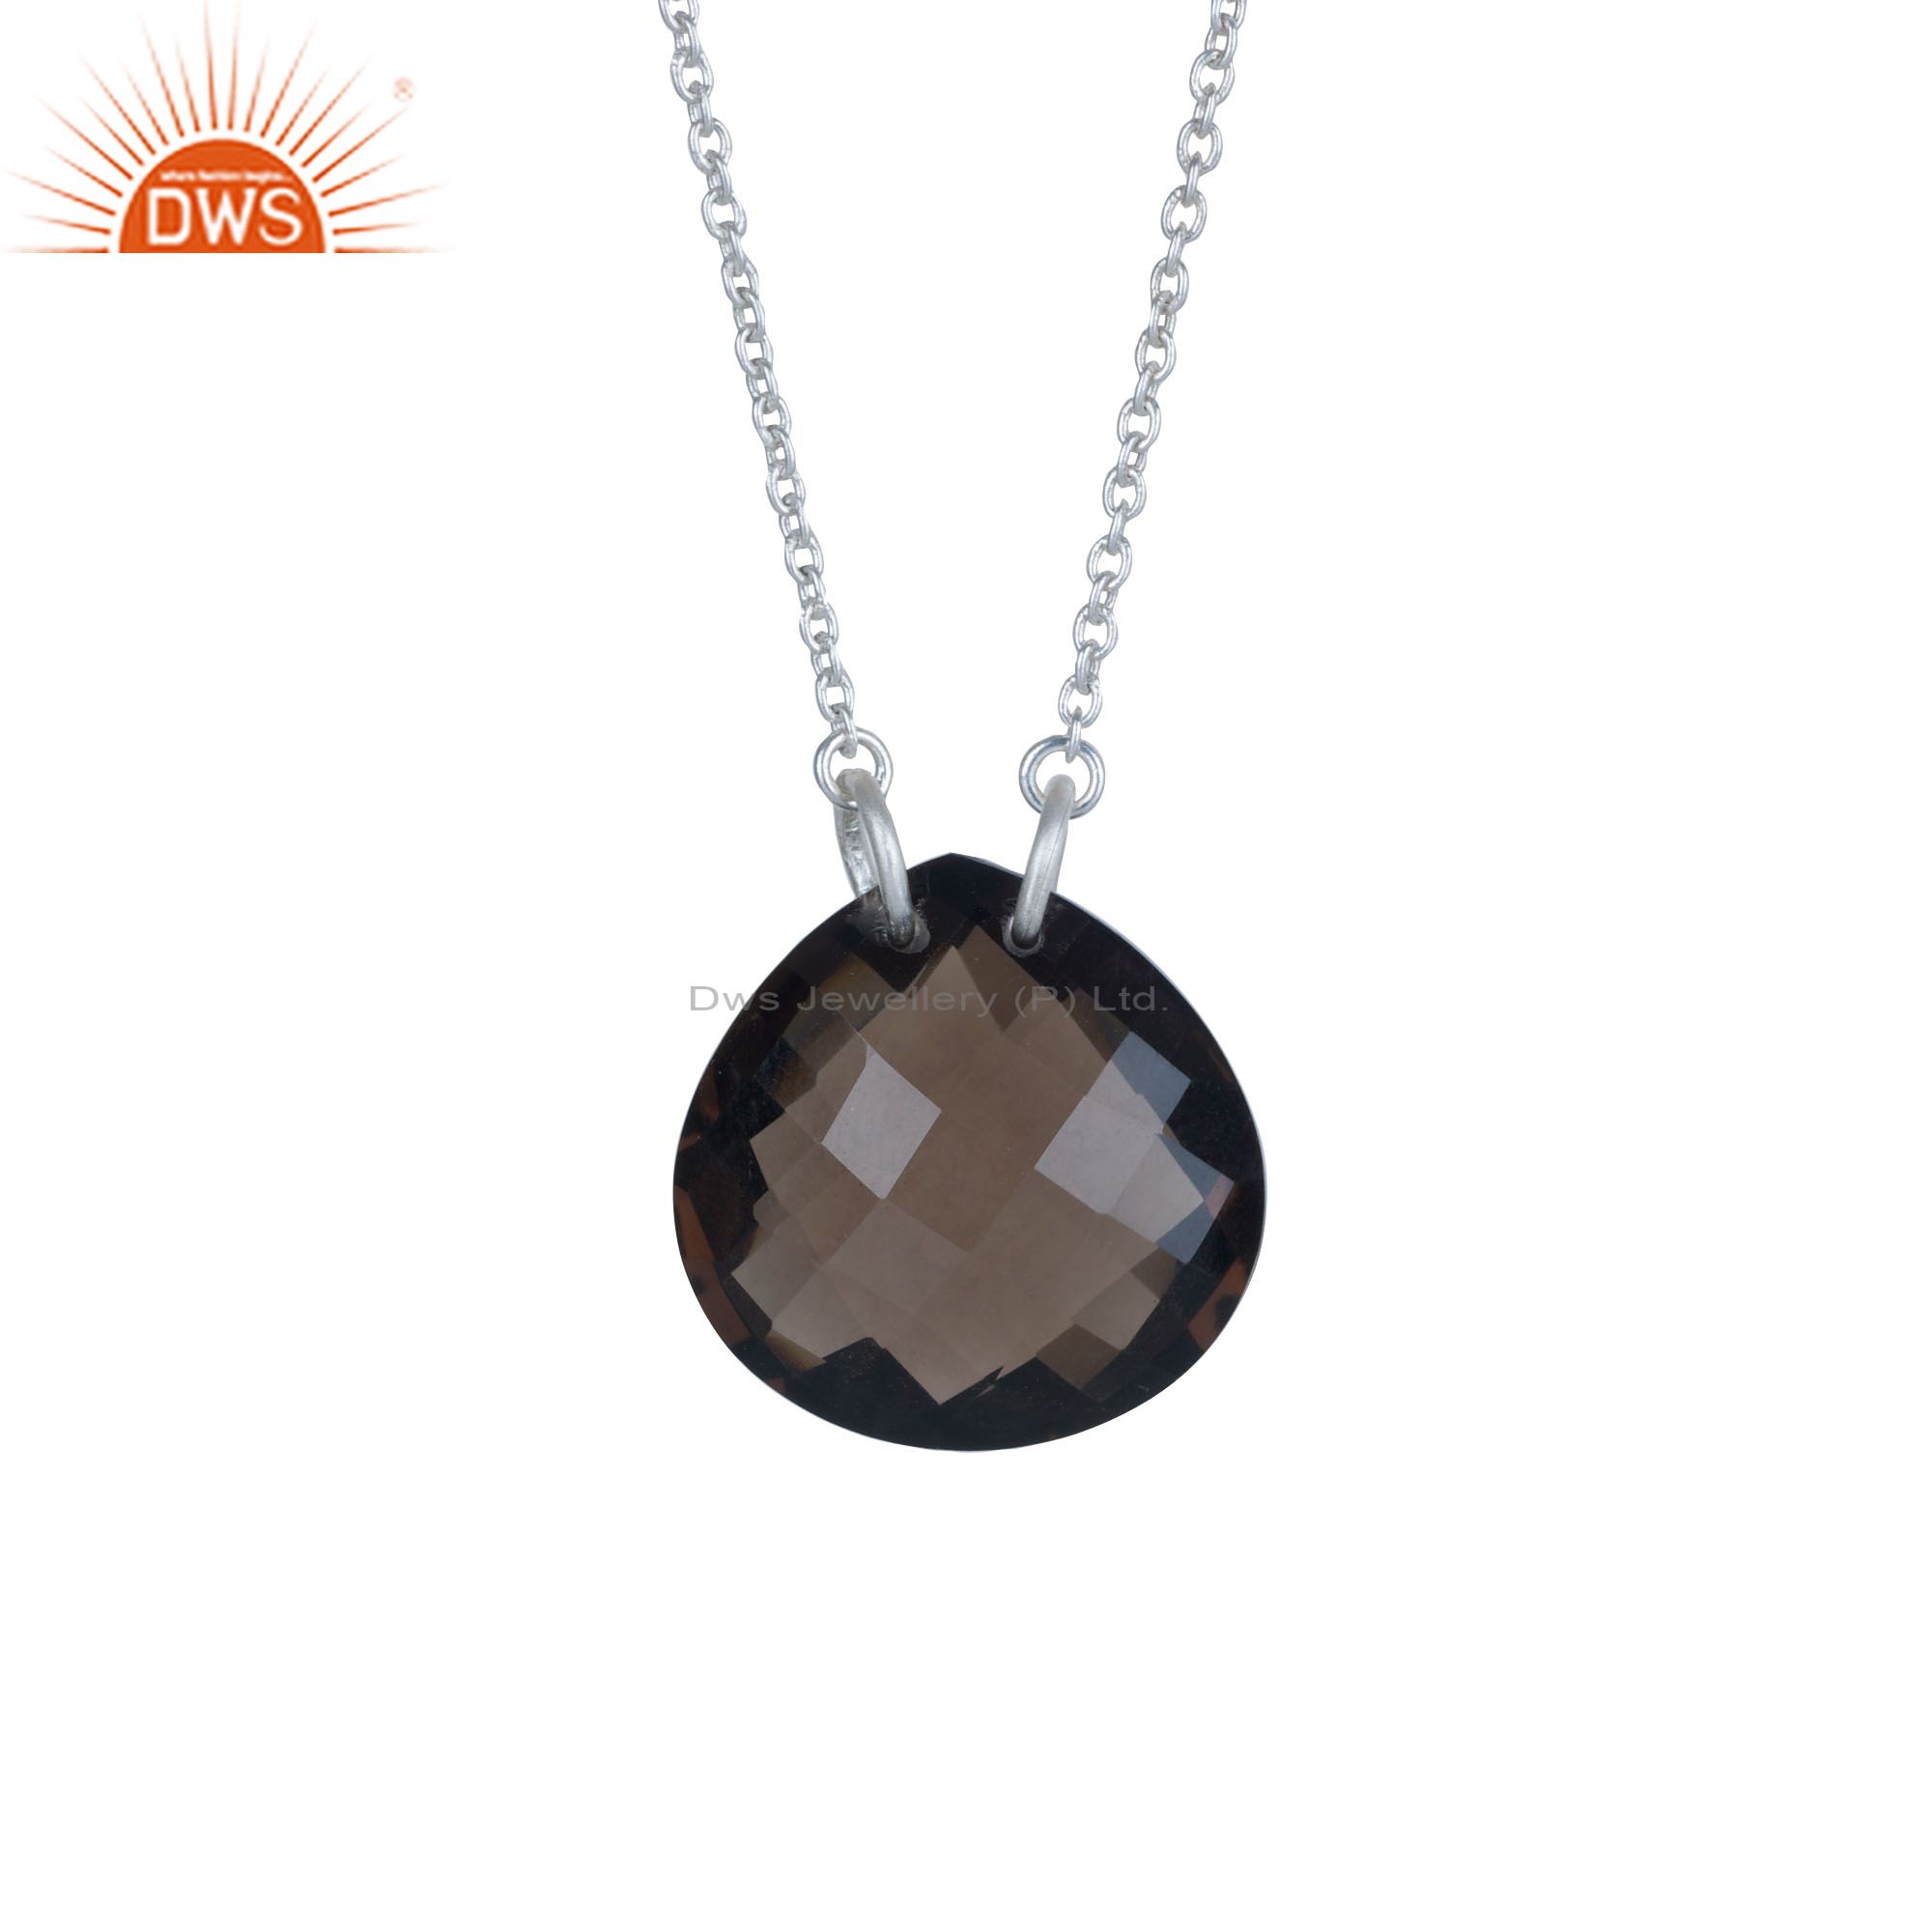 Natural smoky quartz faceted sterling silver gemstone pendant chain necklace